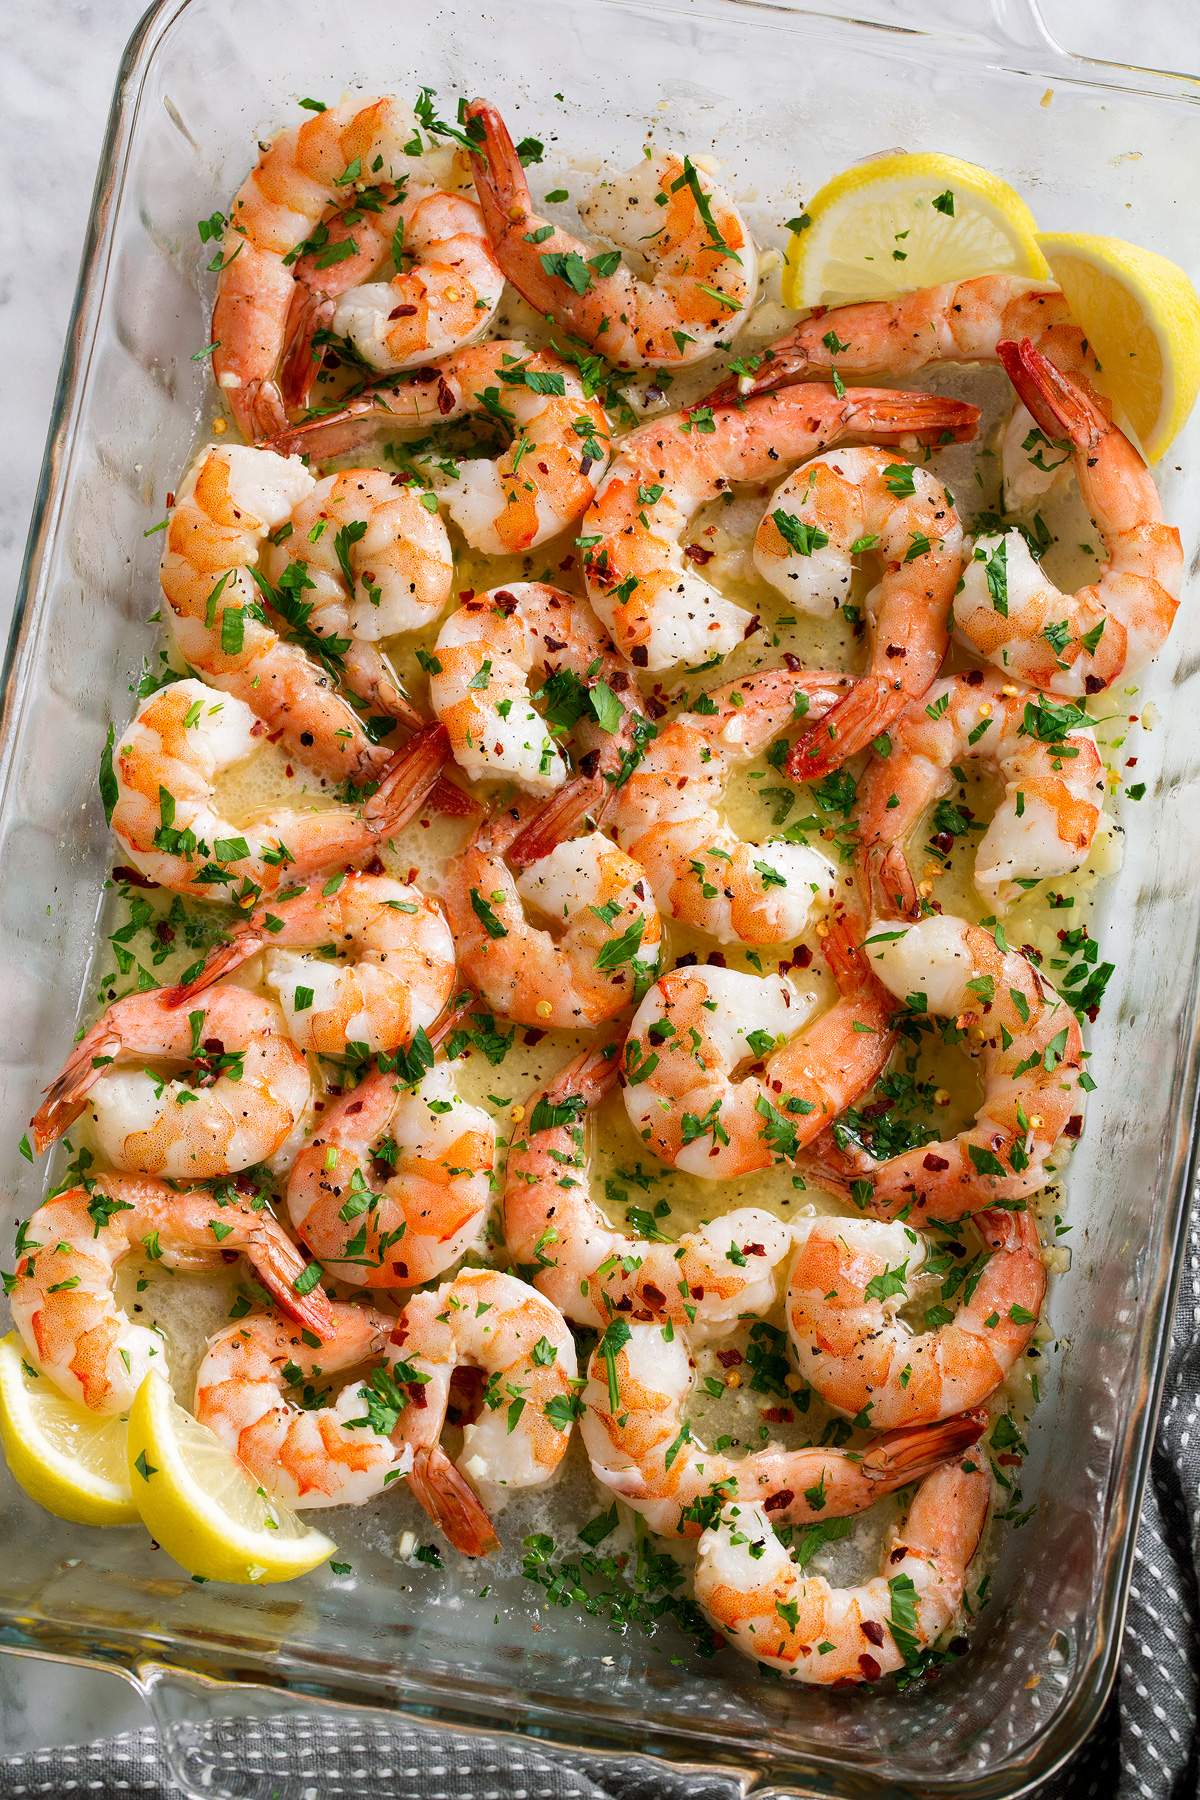 Overhead image of baked shrimp with lemon butter sauce in baking dish.